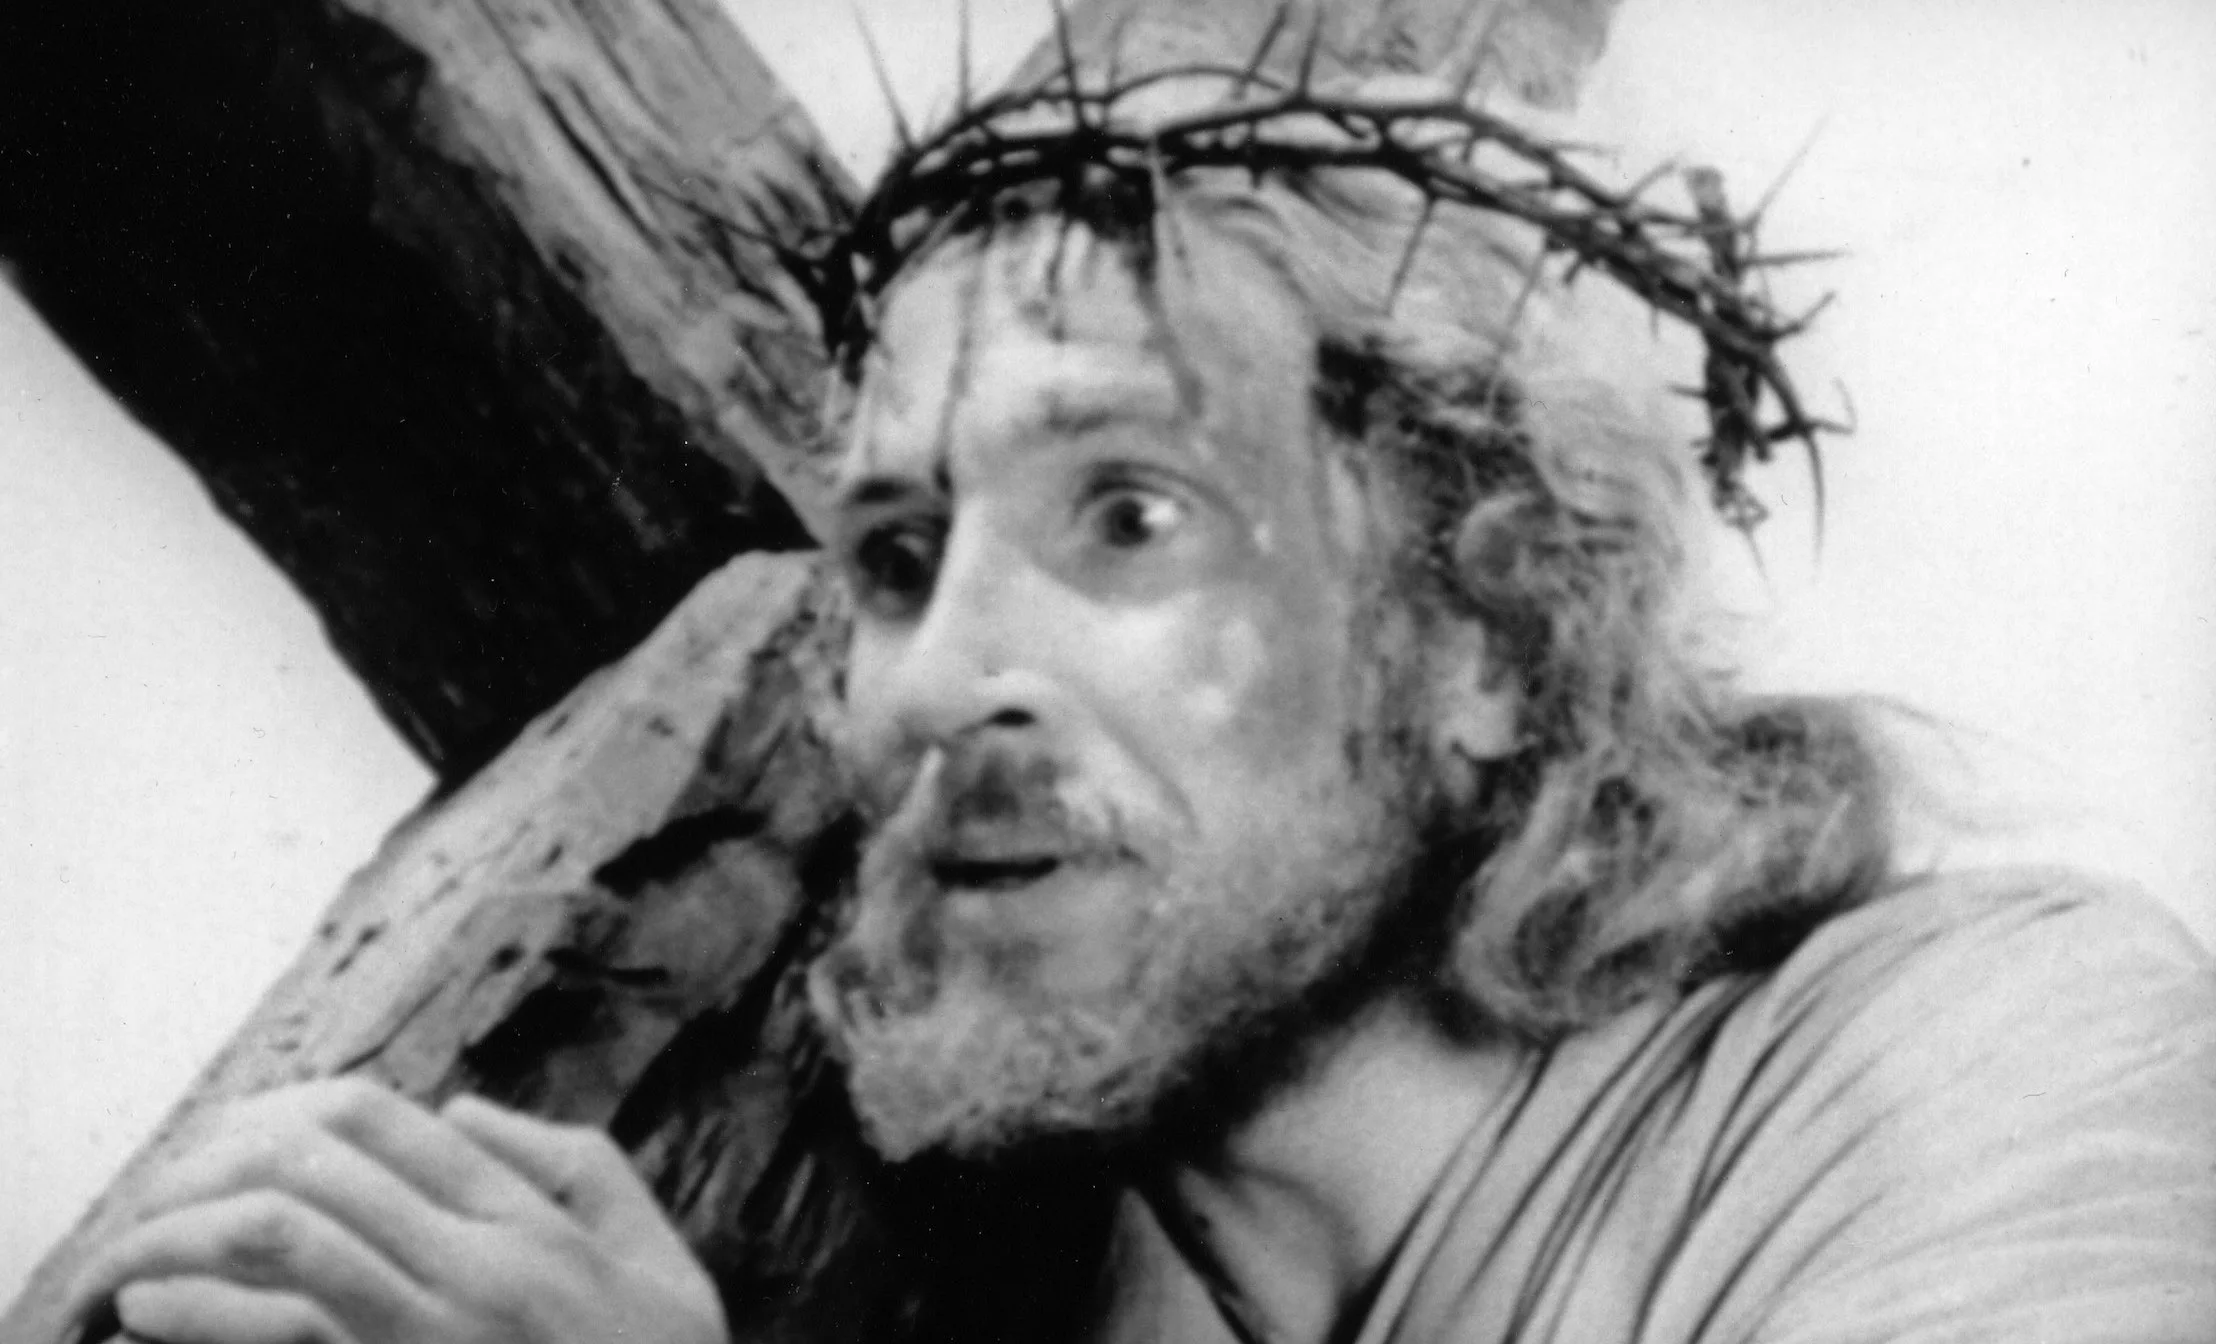 A black & white image of a man with long hair and a beard, wearing a crown of thorns, shouldering a large wooden cross.